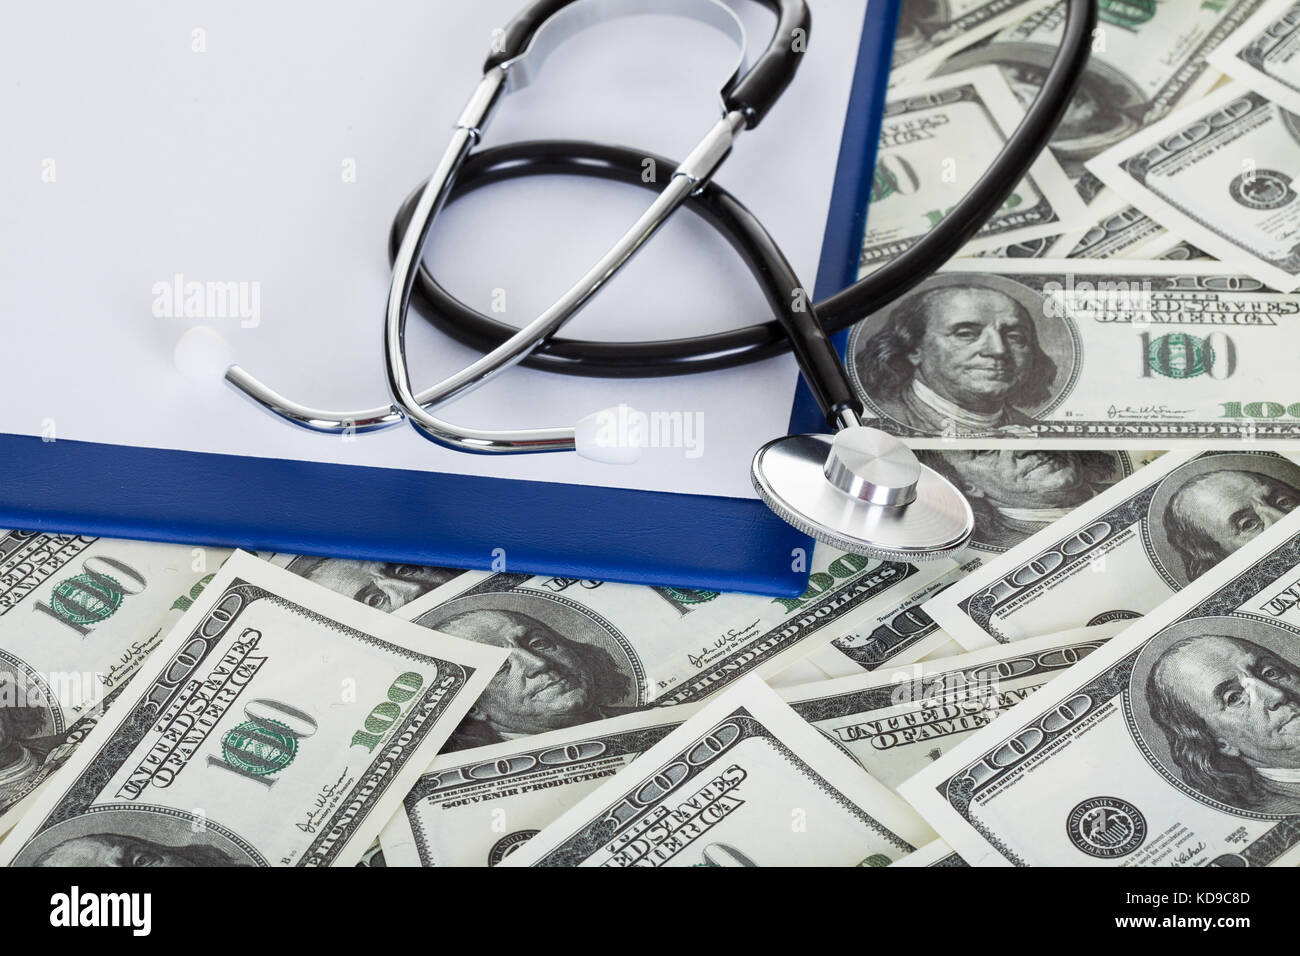 Photos of stethoscope and american dollar notes Stock Photo